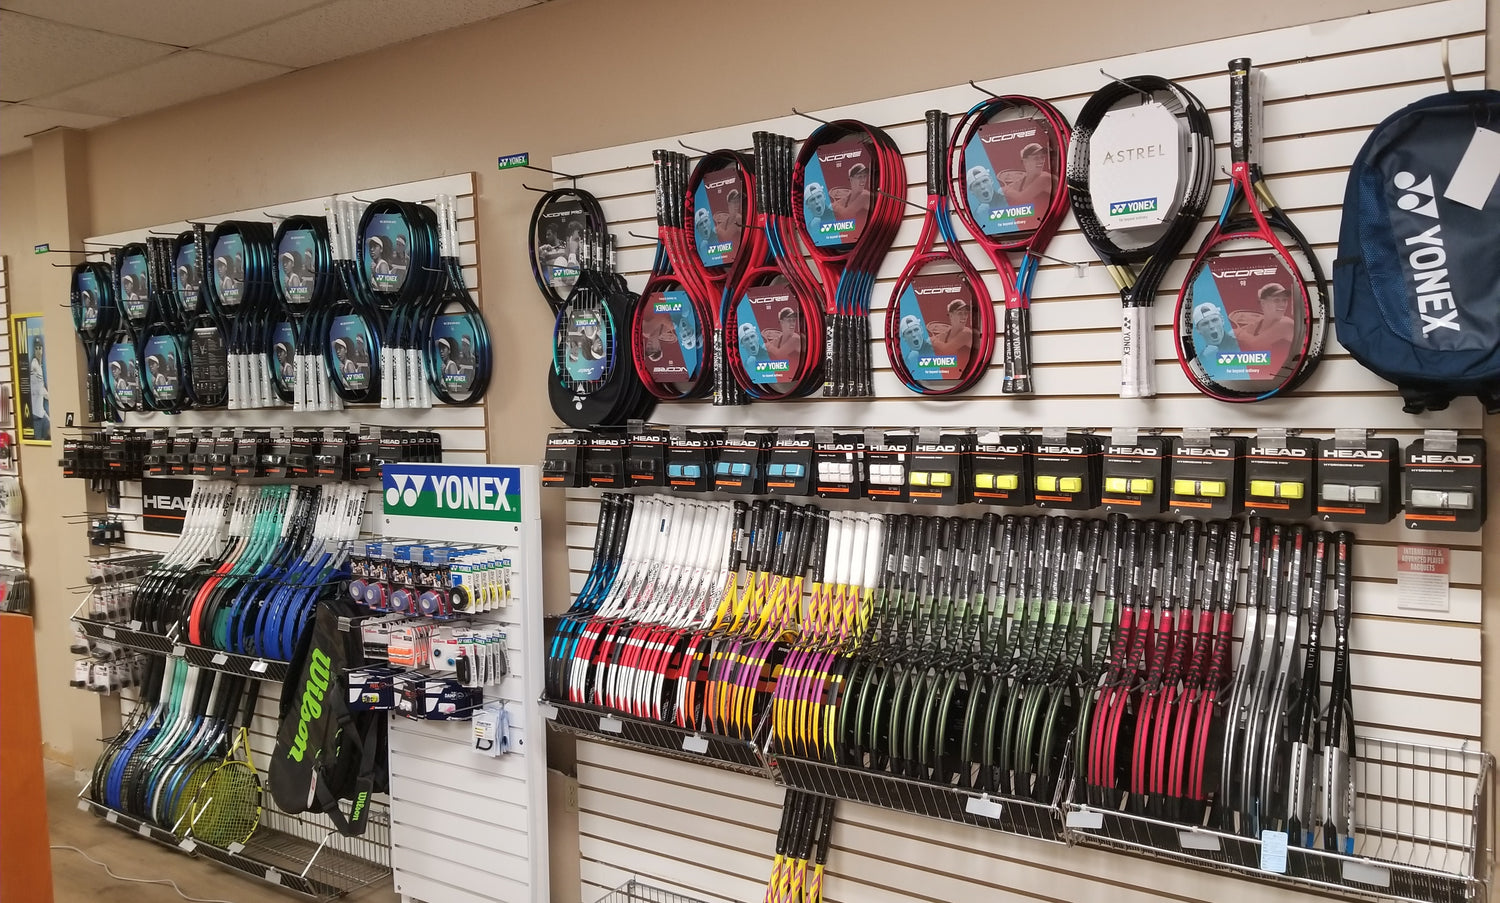 Plaid Racquet & More - Established in 1989 to serve the RVA and Mid-Atlantic tennis communities with quality products and Tennis, Racquetball and Squash stringing services. Now in our 33rd year, we love tennis and it shows!